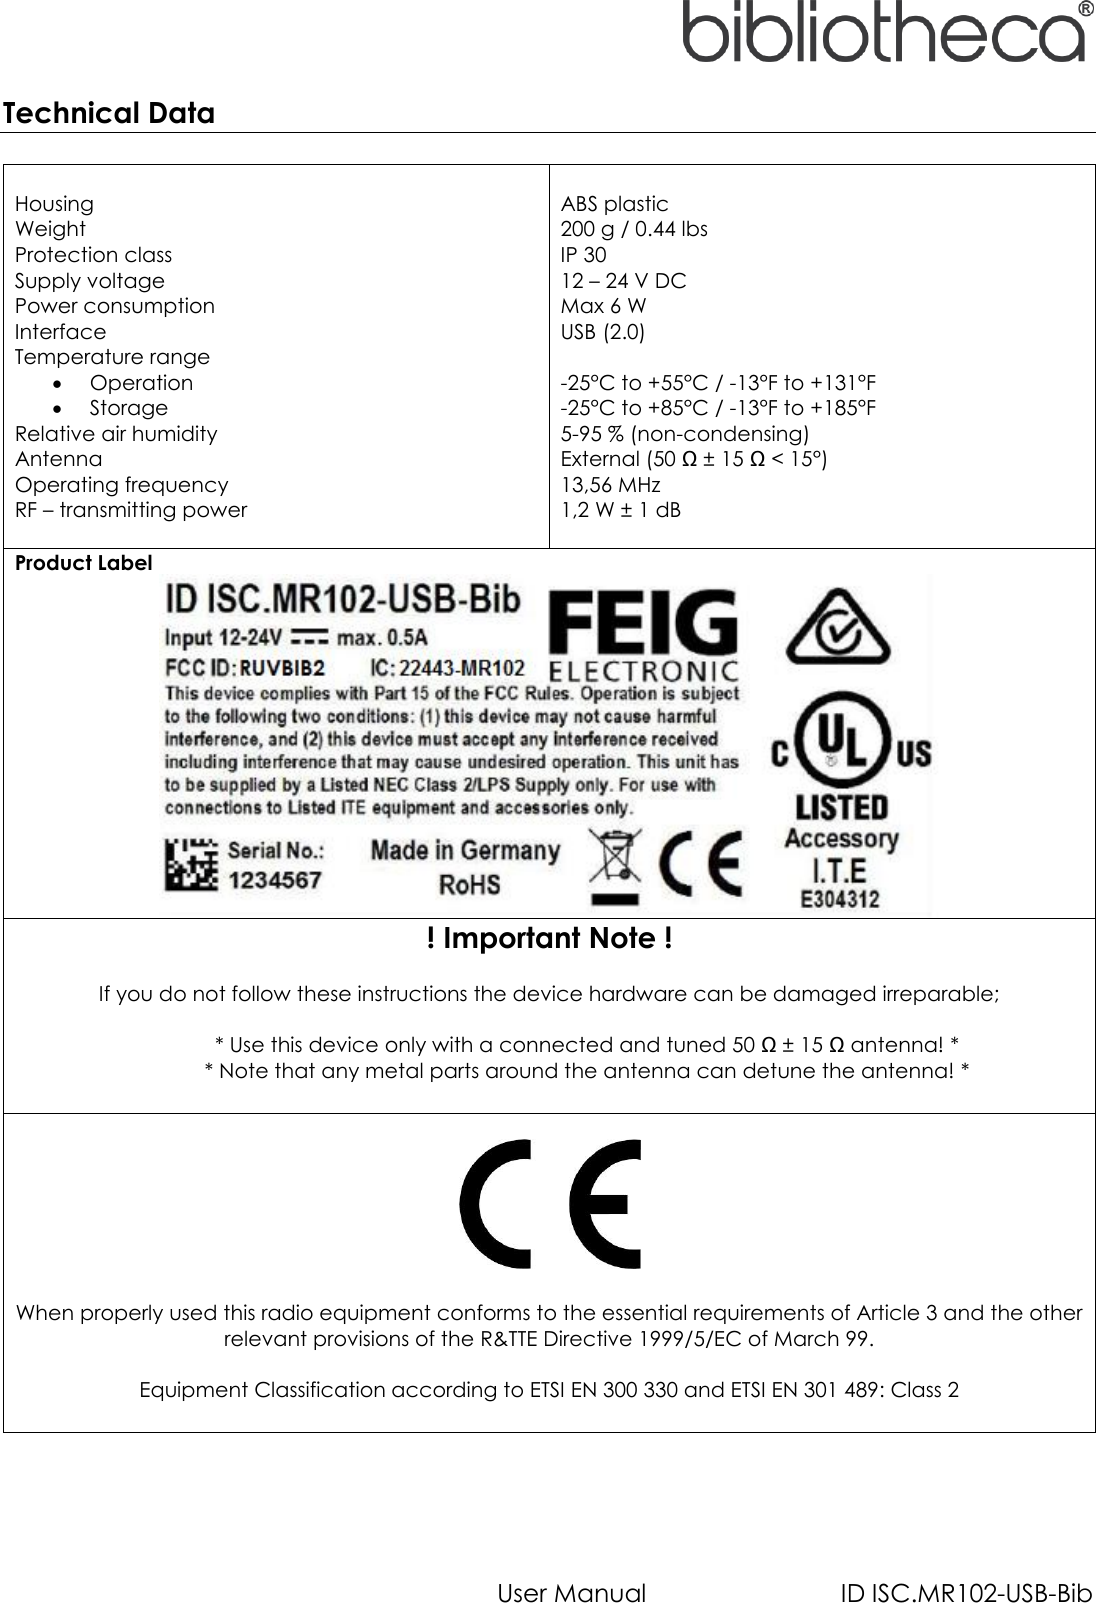   User Manual  ID ISC.MR102-USB-Bib Technical Data   Housing Weight Protection class Supply voltage Power consumption Interface Temperature range  Operation  Storage Relative air humidity Antenna Operating frequency RF – transmitting power   ABS plastic 200 g / 0.44 lbs IP 30 12 – 24 V DC Max 6 W USB (2.0)  -25°C to +55°C / -13°F to +131°F -25°C to +85°C / -13°F to +185°F 5-95 % (non-condensing) External (50 Ω ± 15 Ω &lt; 15°) 13,56 MHz 1,2 W ± 1 dB Product Label  ! Important Note !  If you do not follow these instructions the device hardware can be damaged irreparable;  * Use this device only with a connected and tuned 50 Ω ± 15 Ω antenna! * * Note that any metal parts around the antenna can detune the antenna! *     When properly used this radio equipment conforms to the essential requirements of Article 3 and the other relevant provisions of the R&amp;TTE Directive 1999/5/EC of March 99.  Equipment Classification according to ETSI EN 300 330 and ETSI EN 301 489: Class 2      